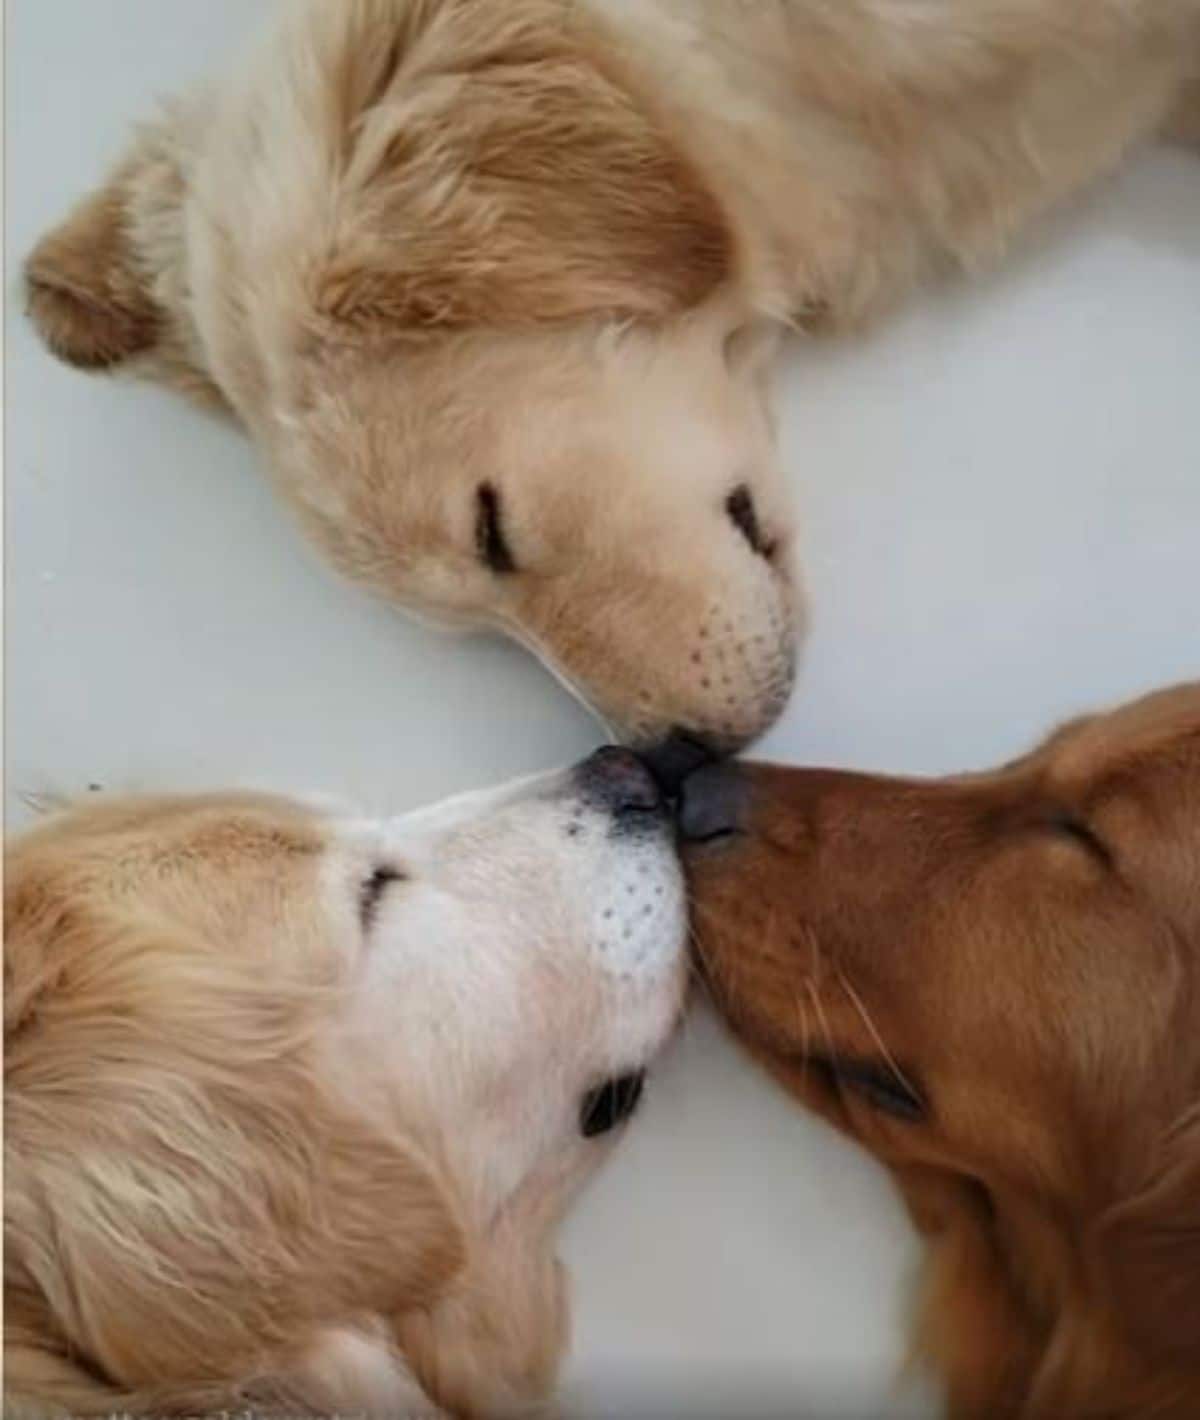 3 golden retrievers sleeping on a the floor while their noses touch